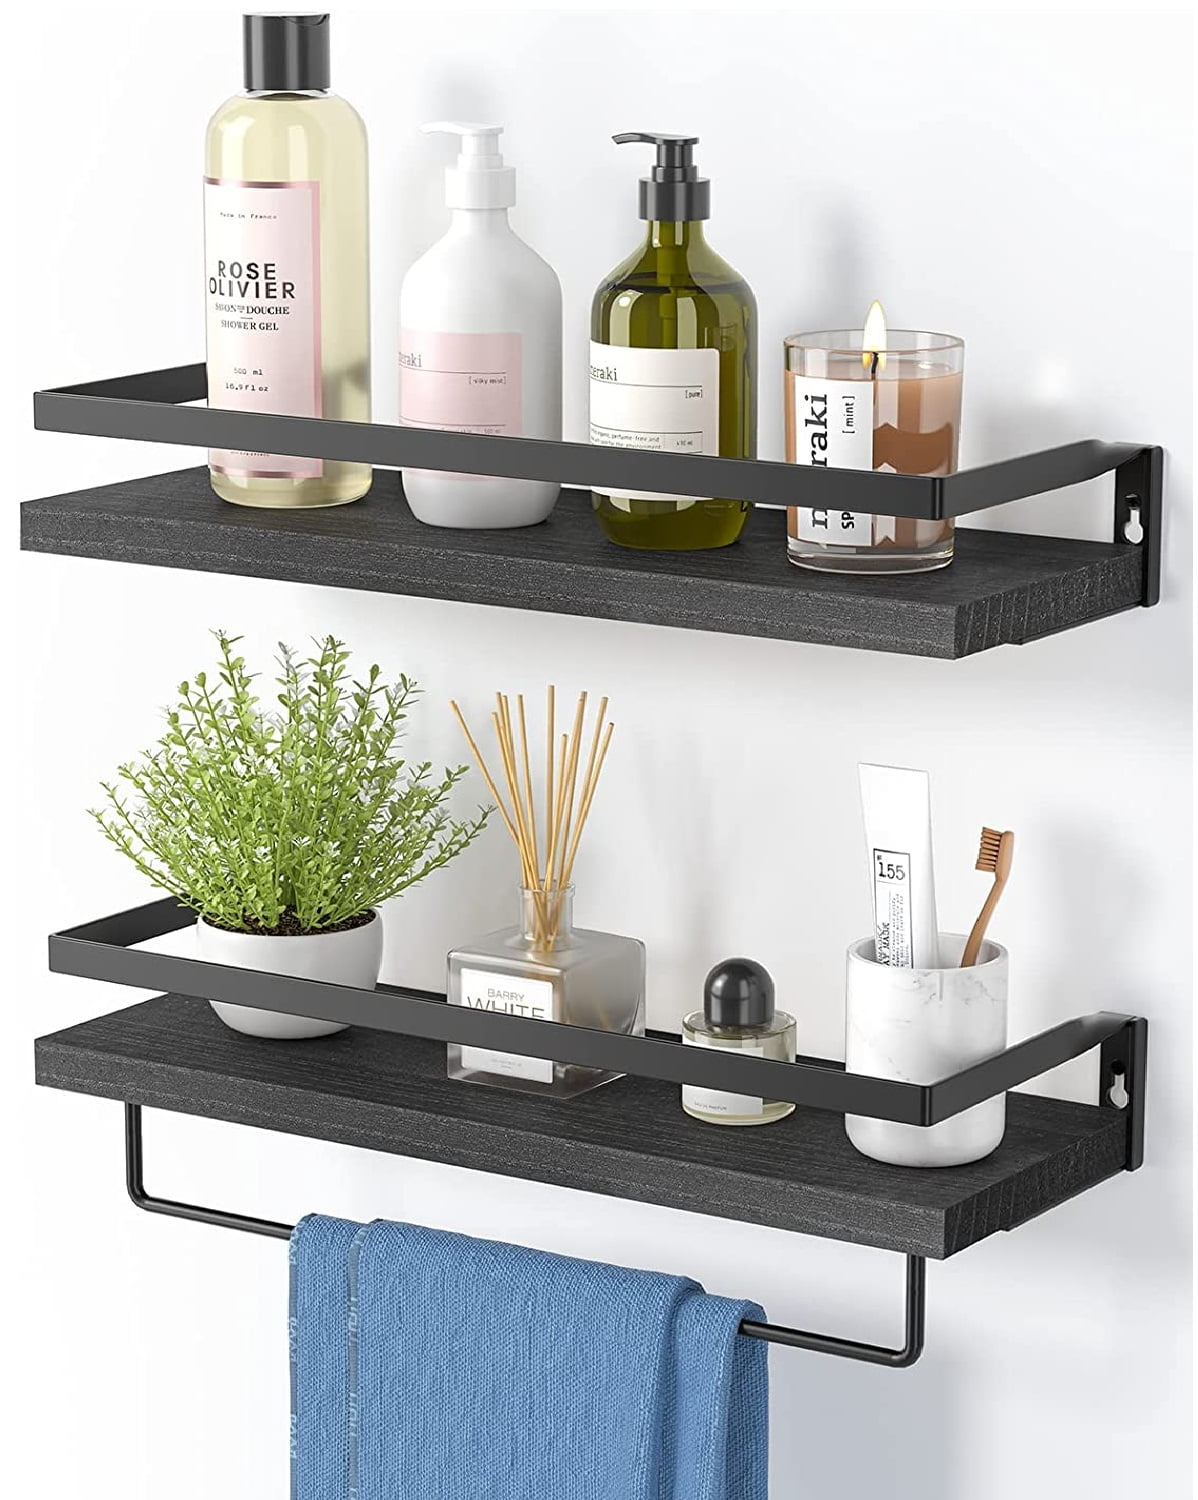 Wall-Mounted Torched Wood Paper Towel Holder with Display Shelf